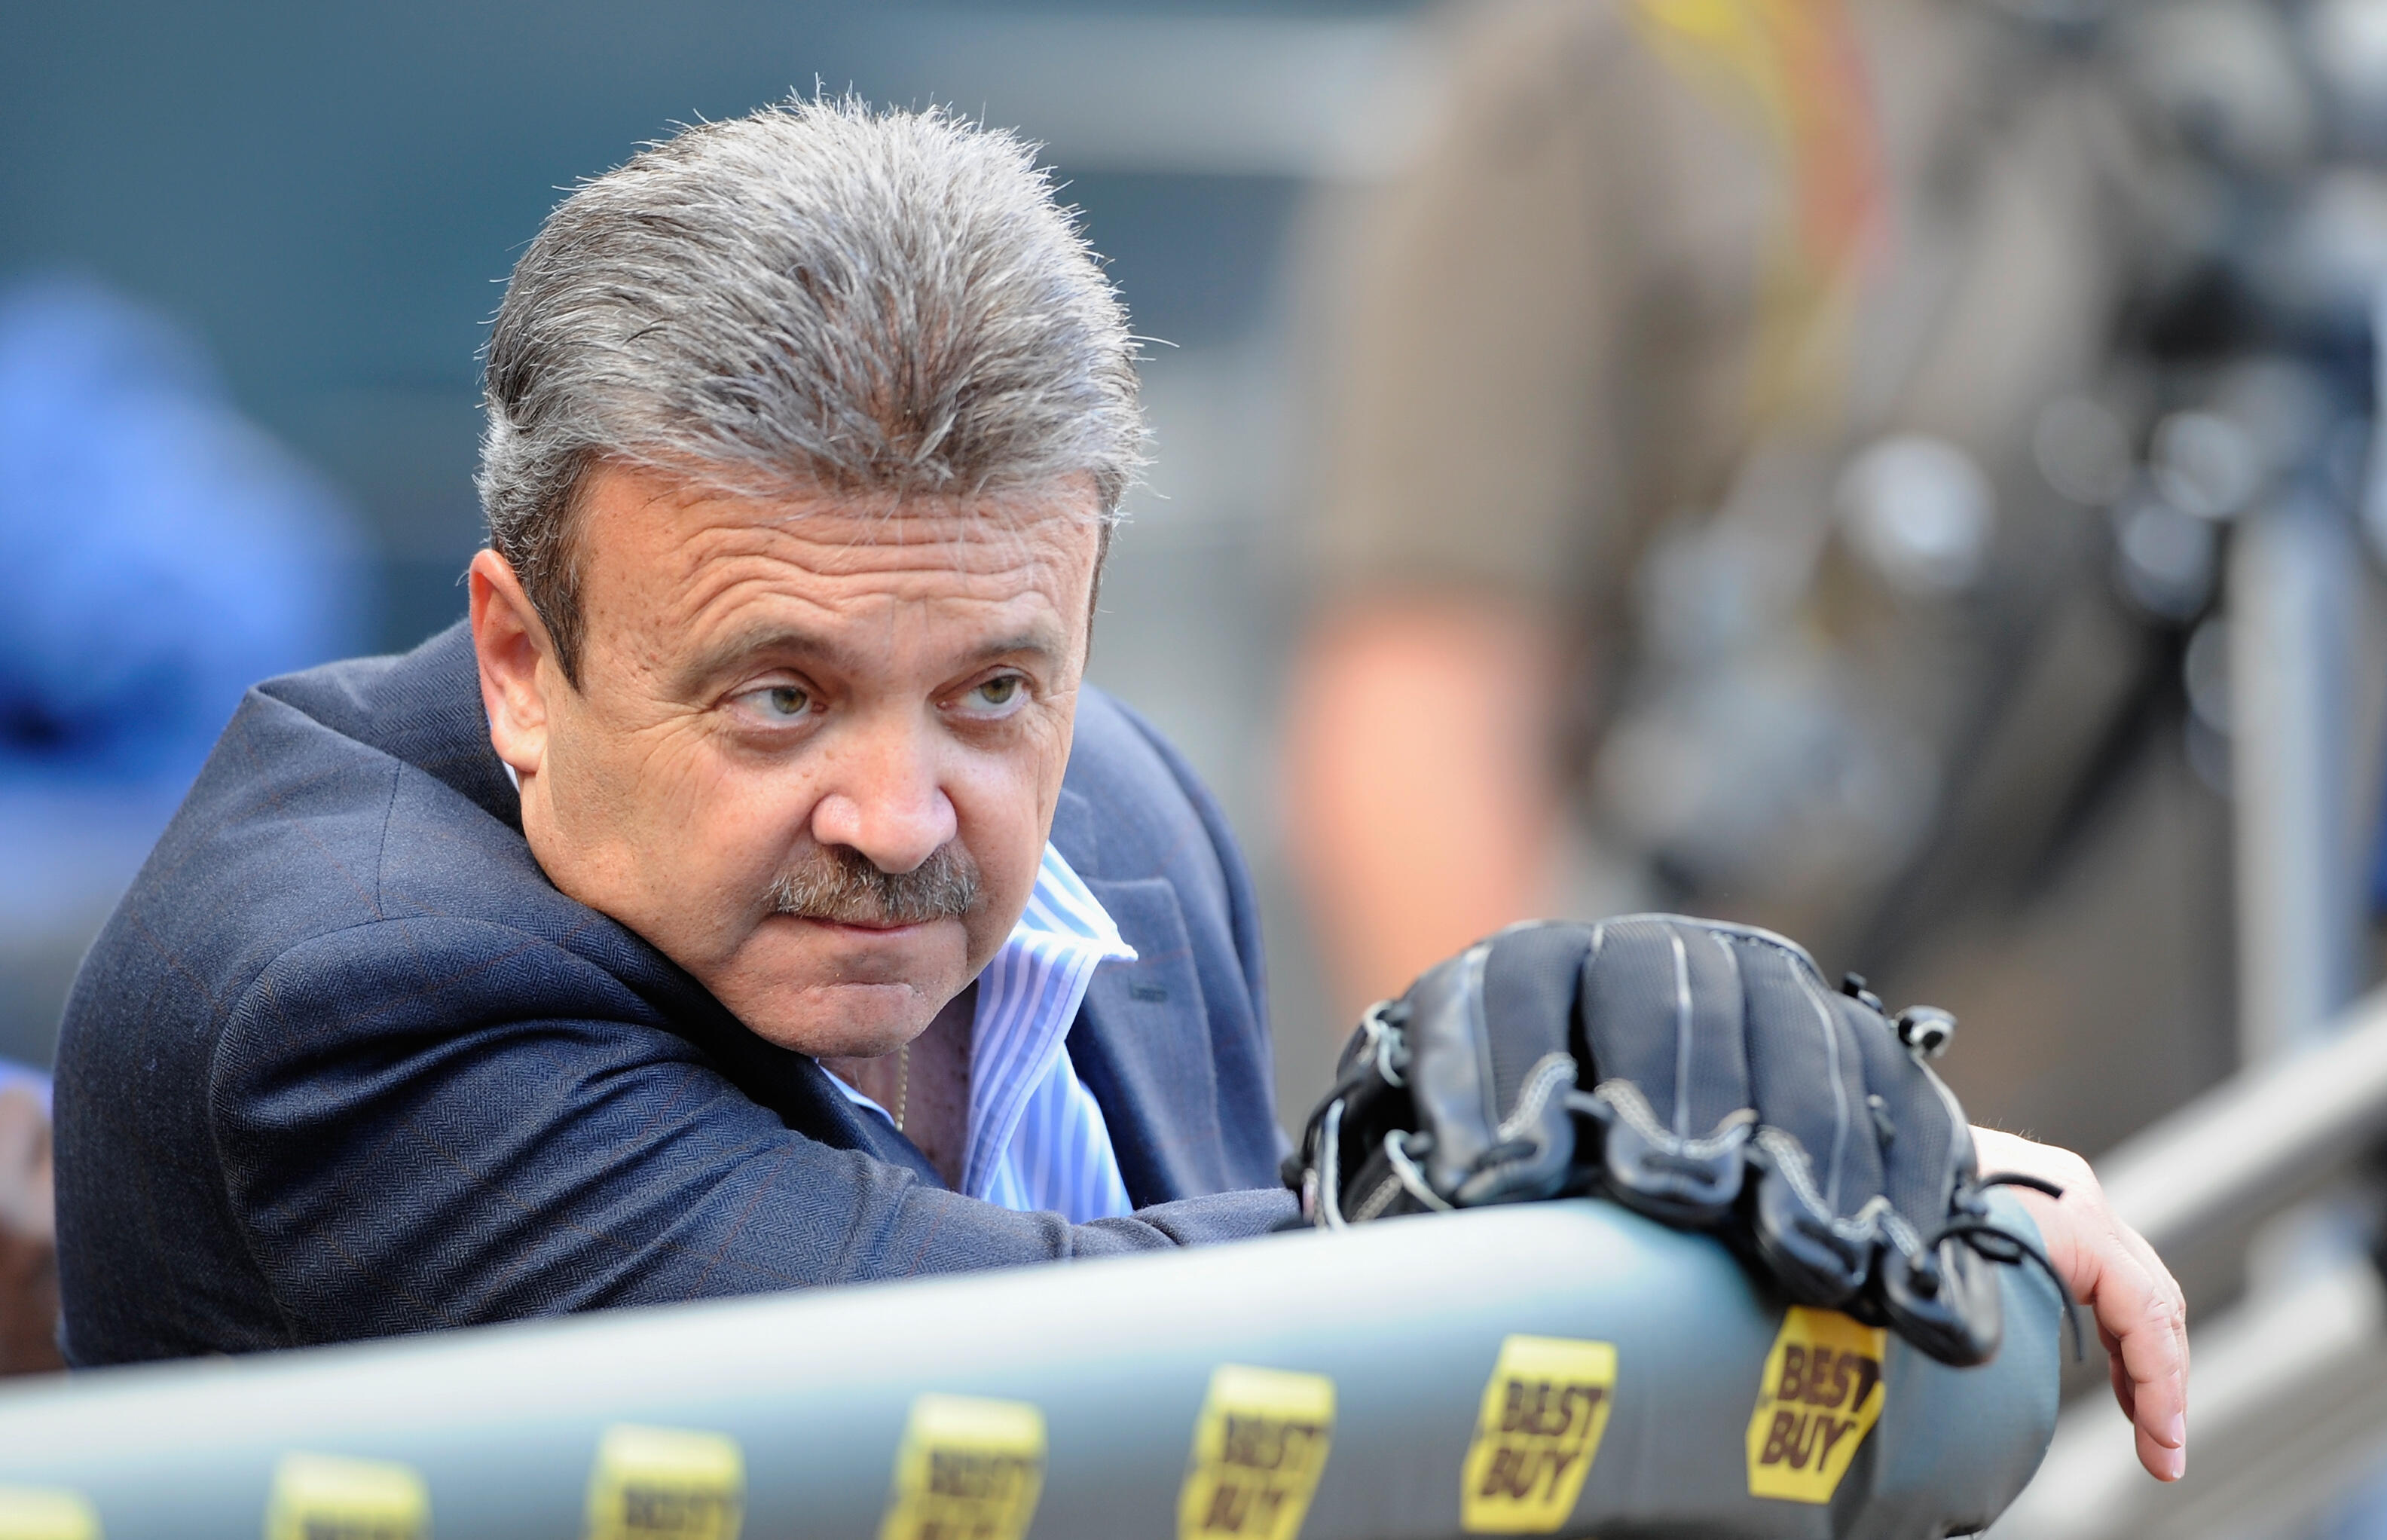 MINNEAPOLIS, MN - JUNE 27: Ned Colletti, General Manager of the Los Angeles Dodgers, watches batting practice before the game against the Minnesota Twins on June 27, 2011 at Target Field in Minneapolis, Minnesota. (Photo by Hannah Foslien/Getty Images)